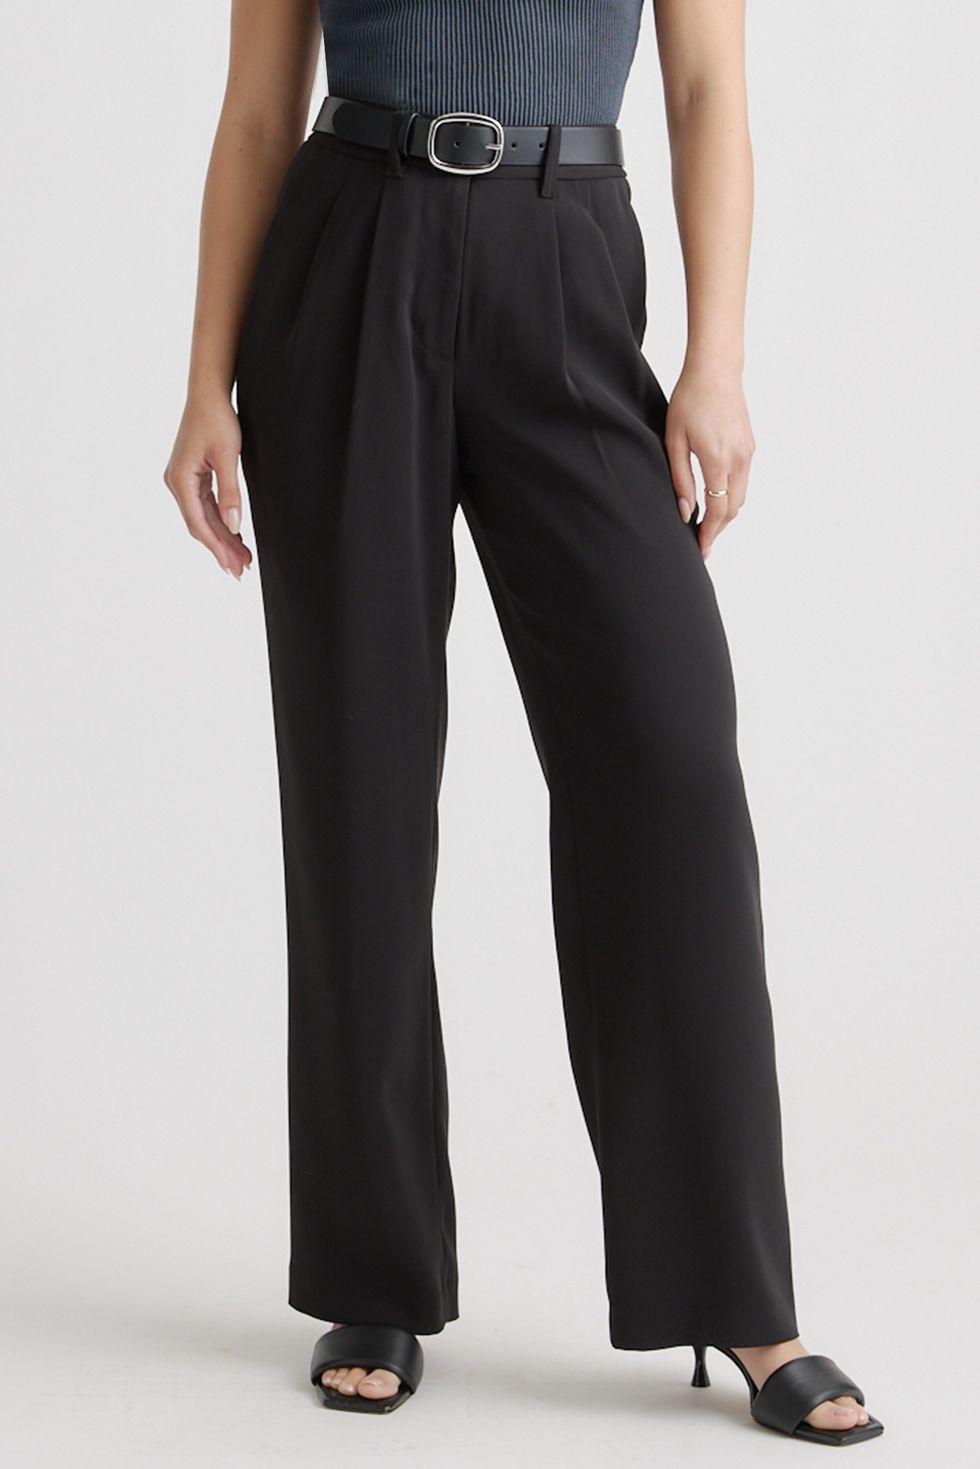 18 Best High-Waisted Pants for Women - 2023